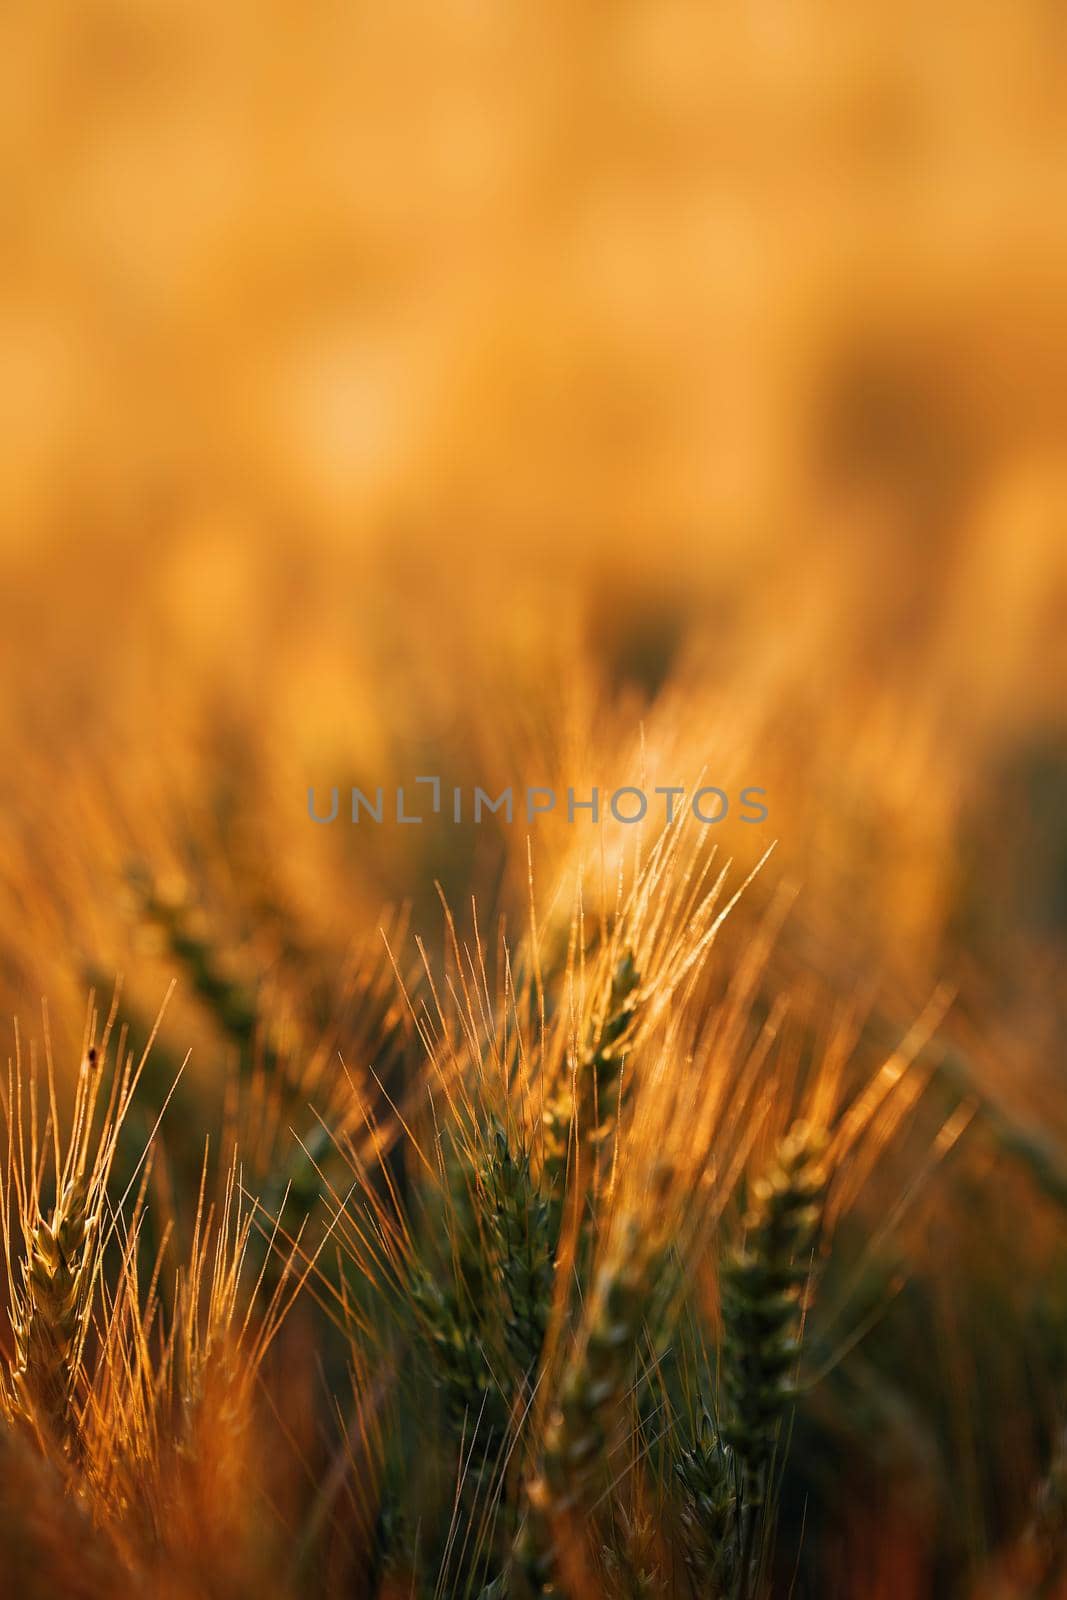 Wheat in the rays of dawn. Ears of wheat ripen in the field. Wheat field, agriculture, agricultural background. Ecological clean food, food safety. Green wheat fields by EvgeniyQW